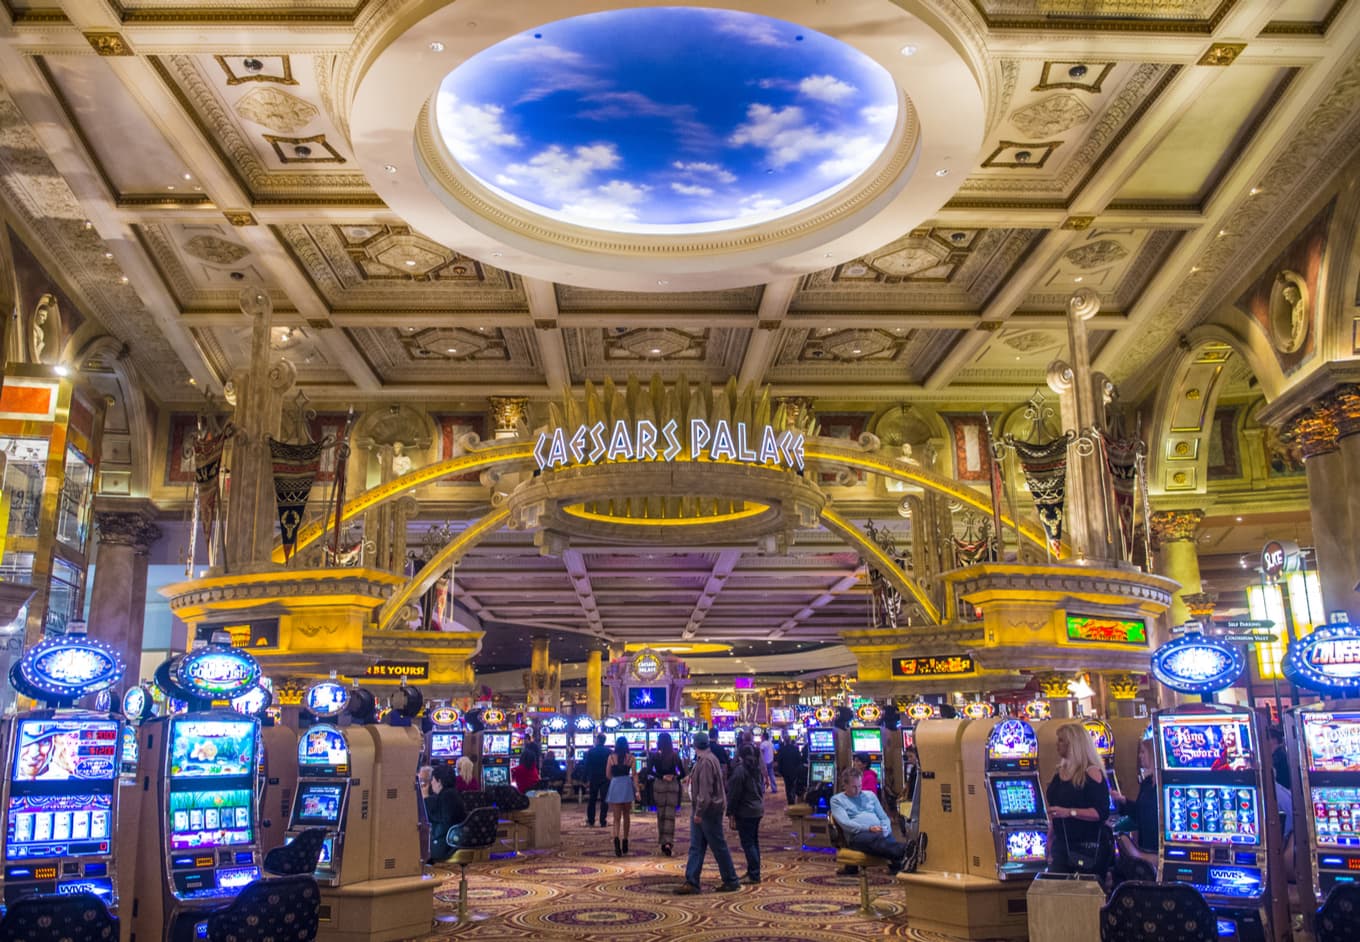 Best Live Casinos In CanadaLike An Expert. Follow These 5 Steps To Get There